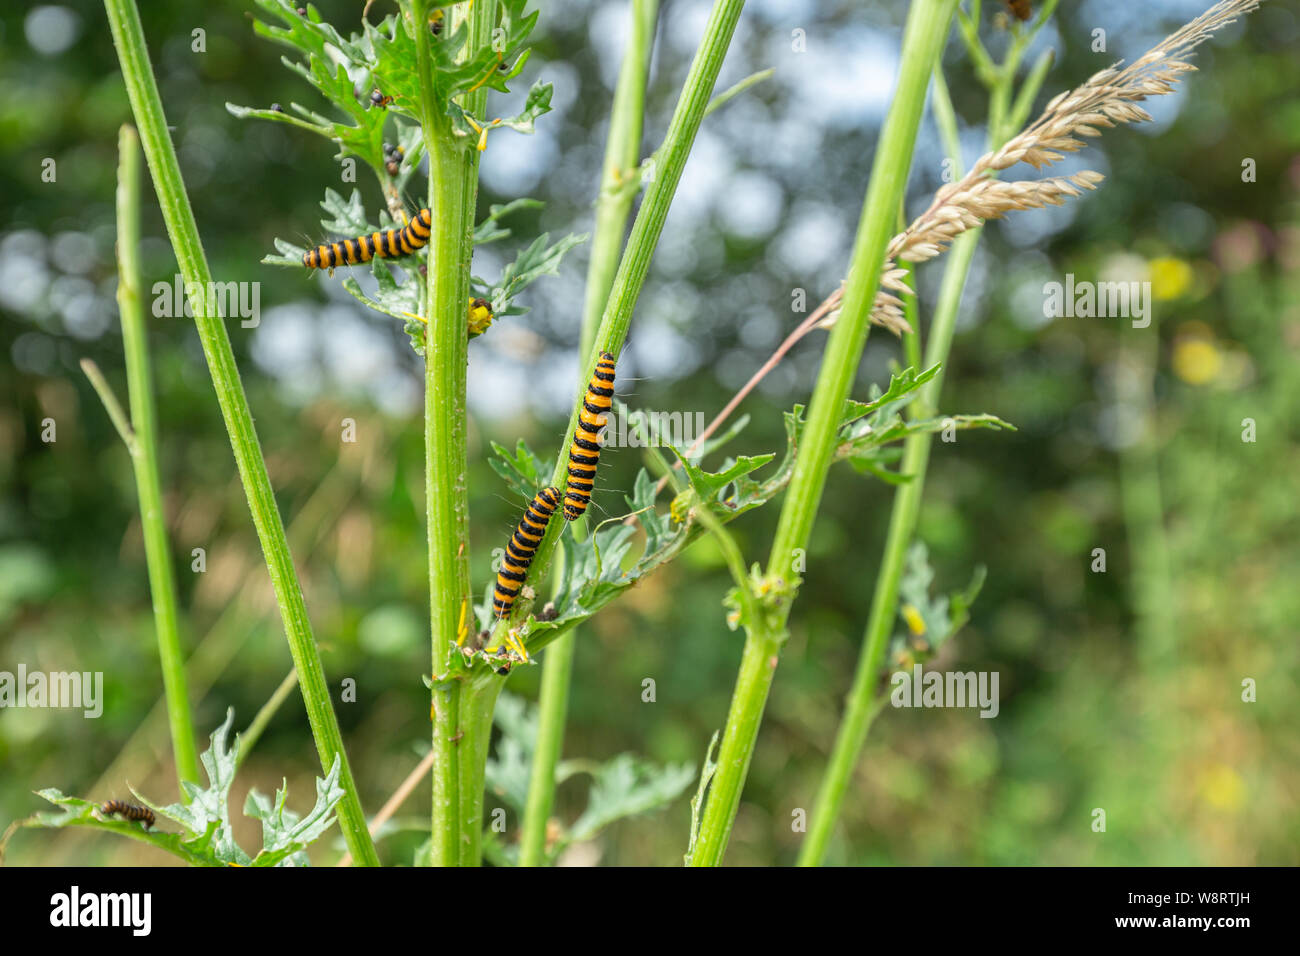 Simple Visual Guide: 17 Types of Striped Caterpillars That May Be Eating  Your Plants – Garden Betty